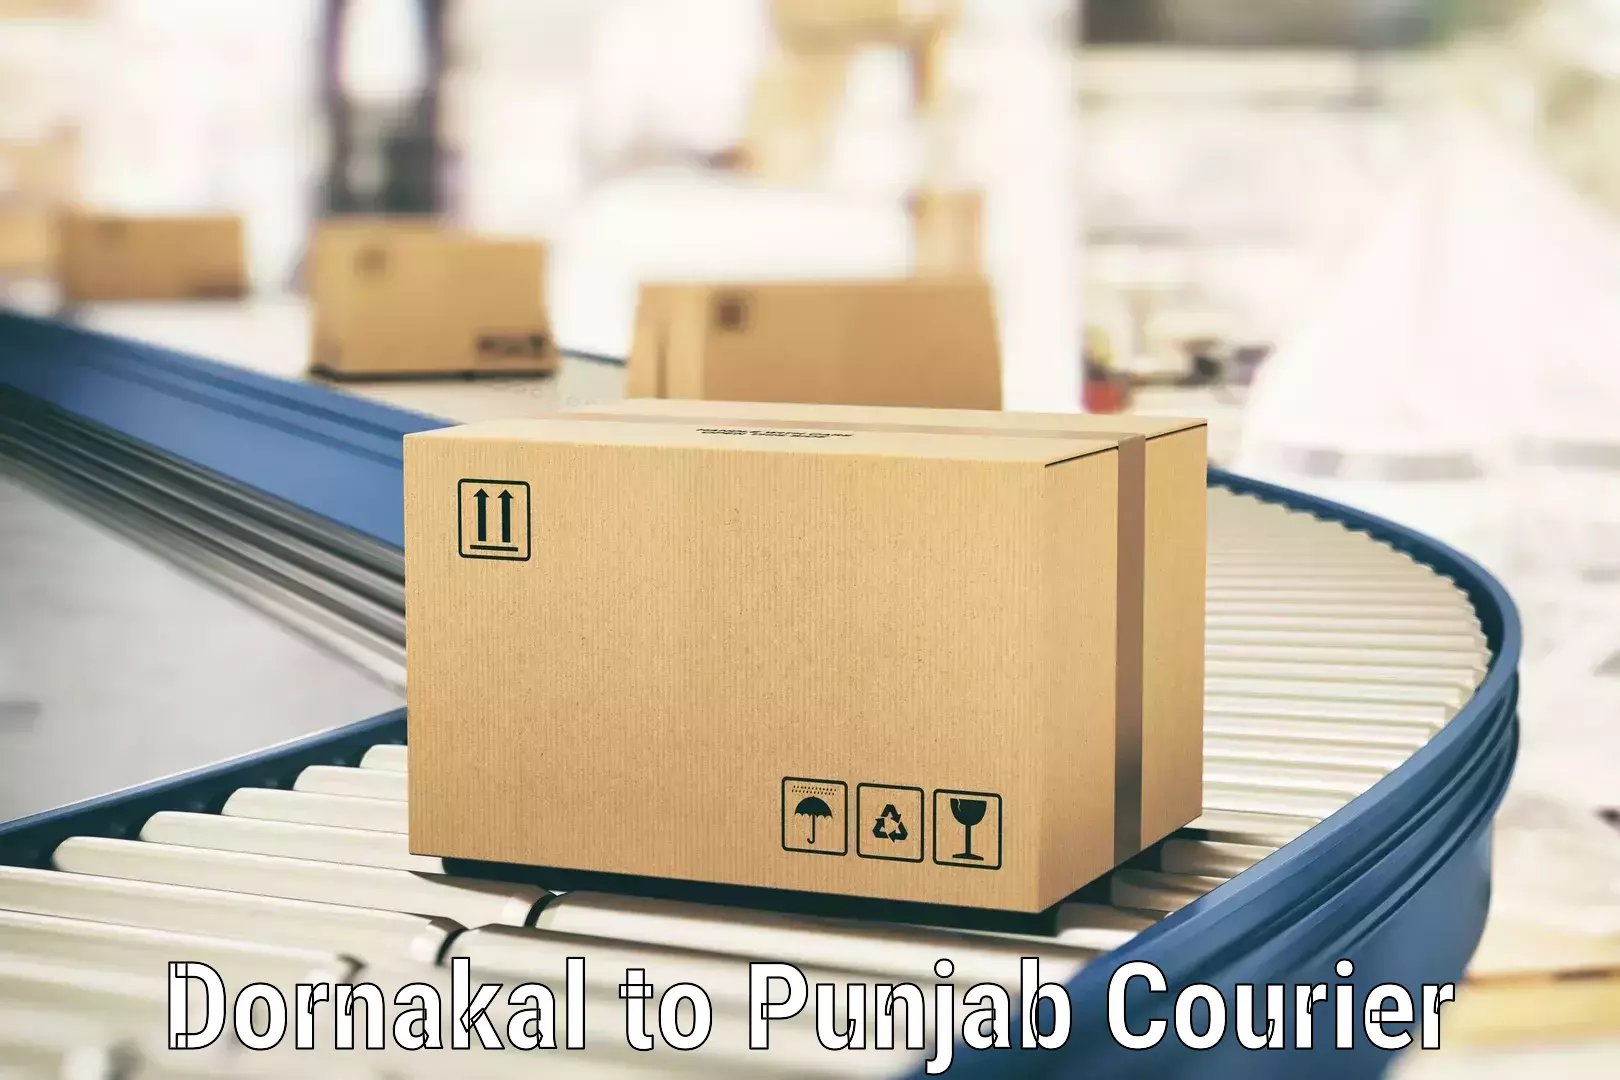 Reliable parcel services Dornakal to Malout